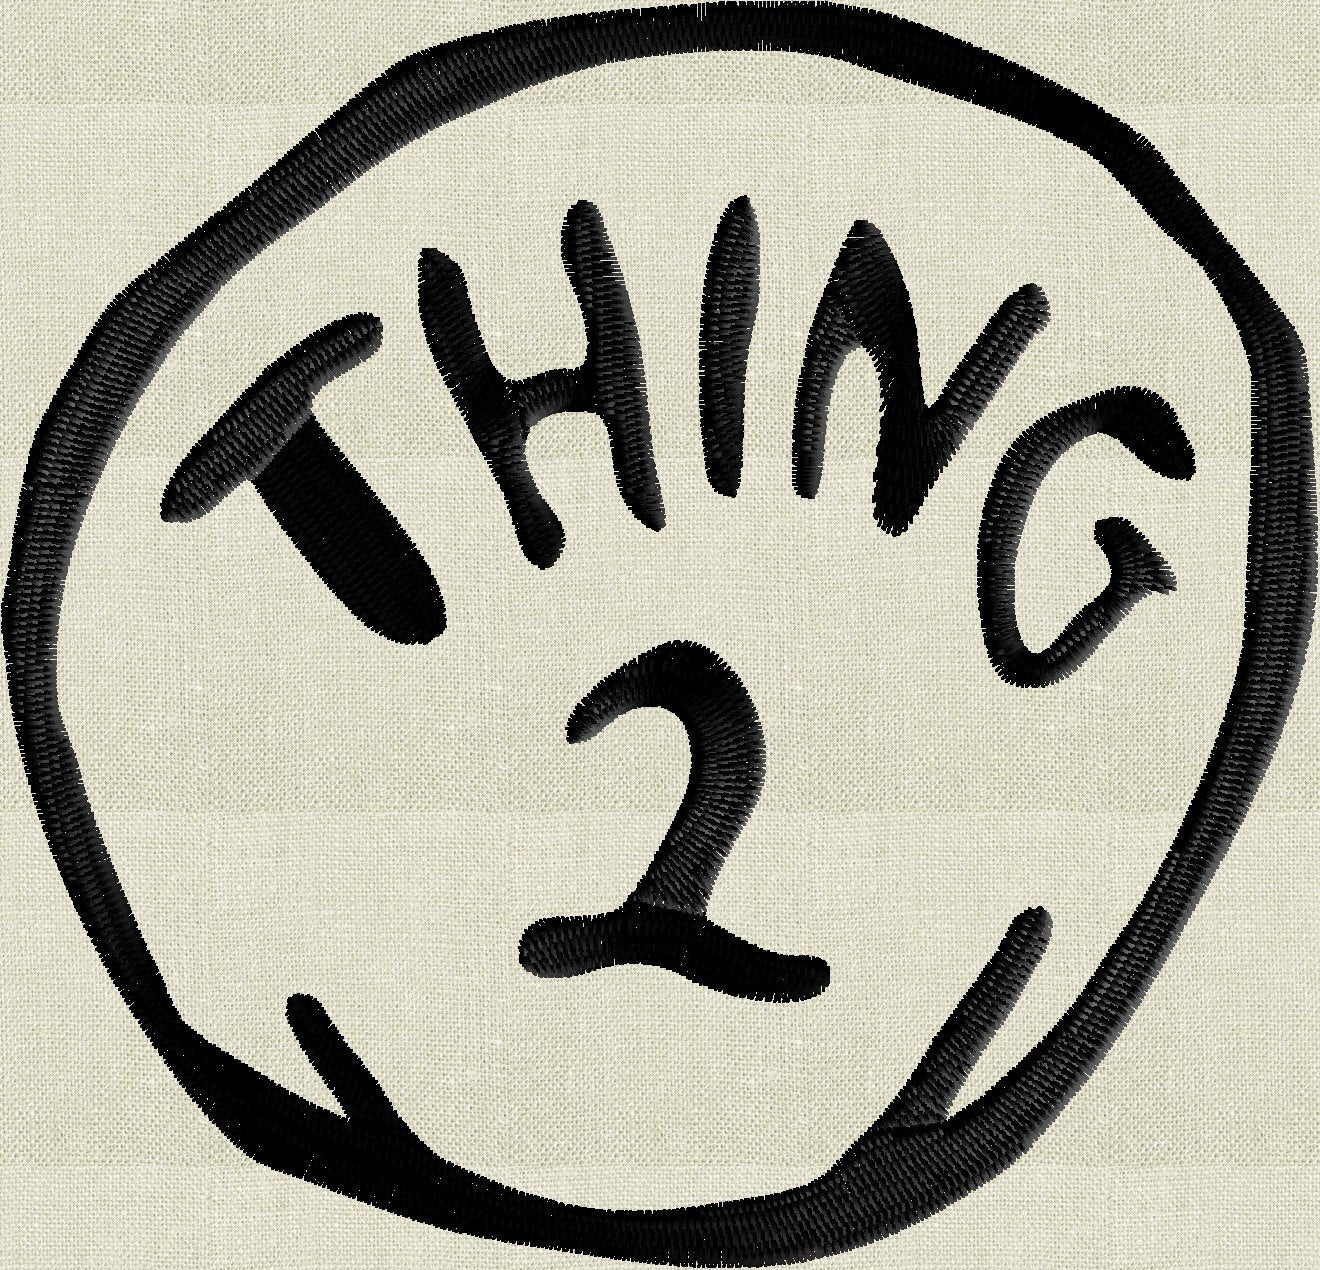 BUNDLE! Thing One & Thing 2 Embroidery DESIGN FILE - Instant download - Exp Vp3 Dst Hus Jef Pes formats - 2 sizes